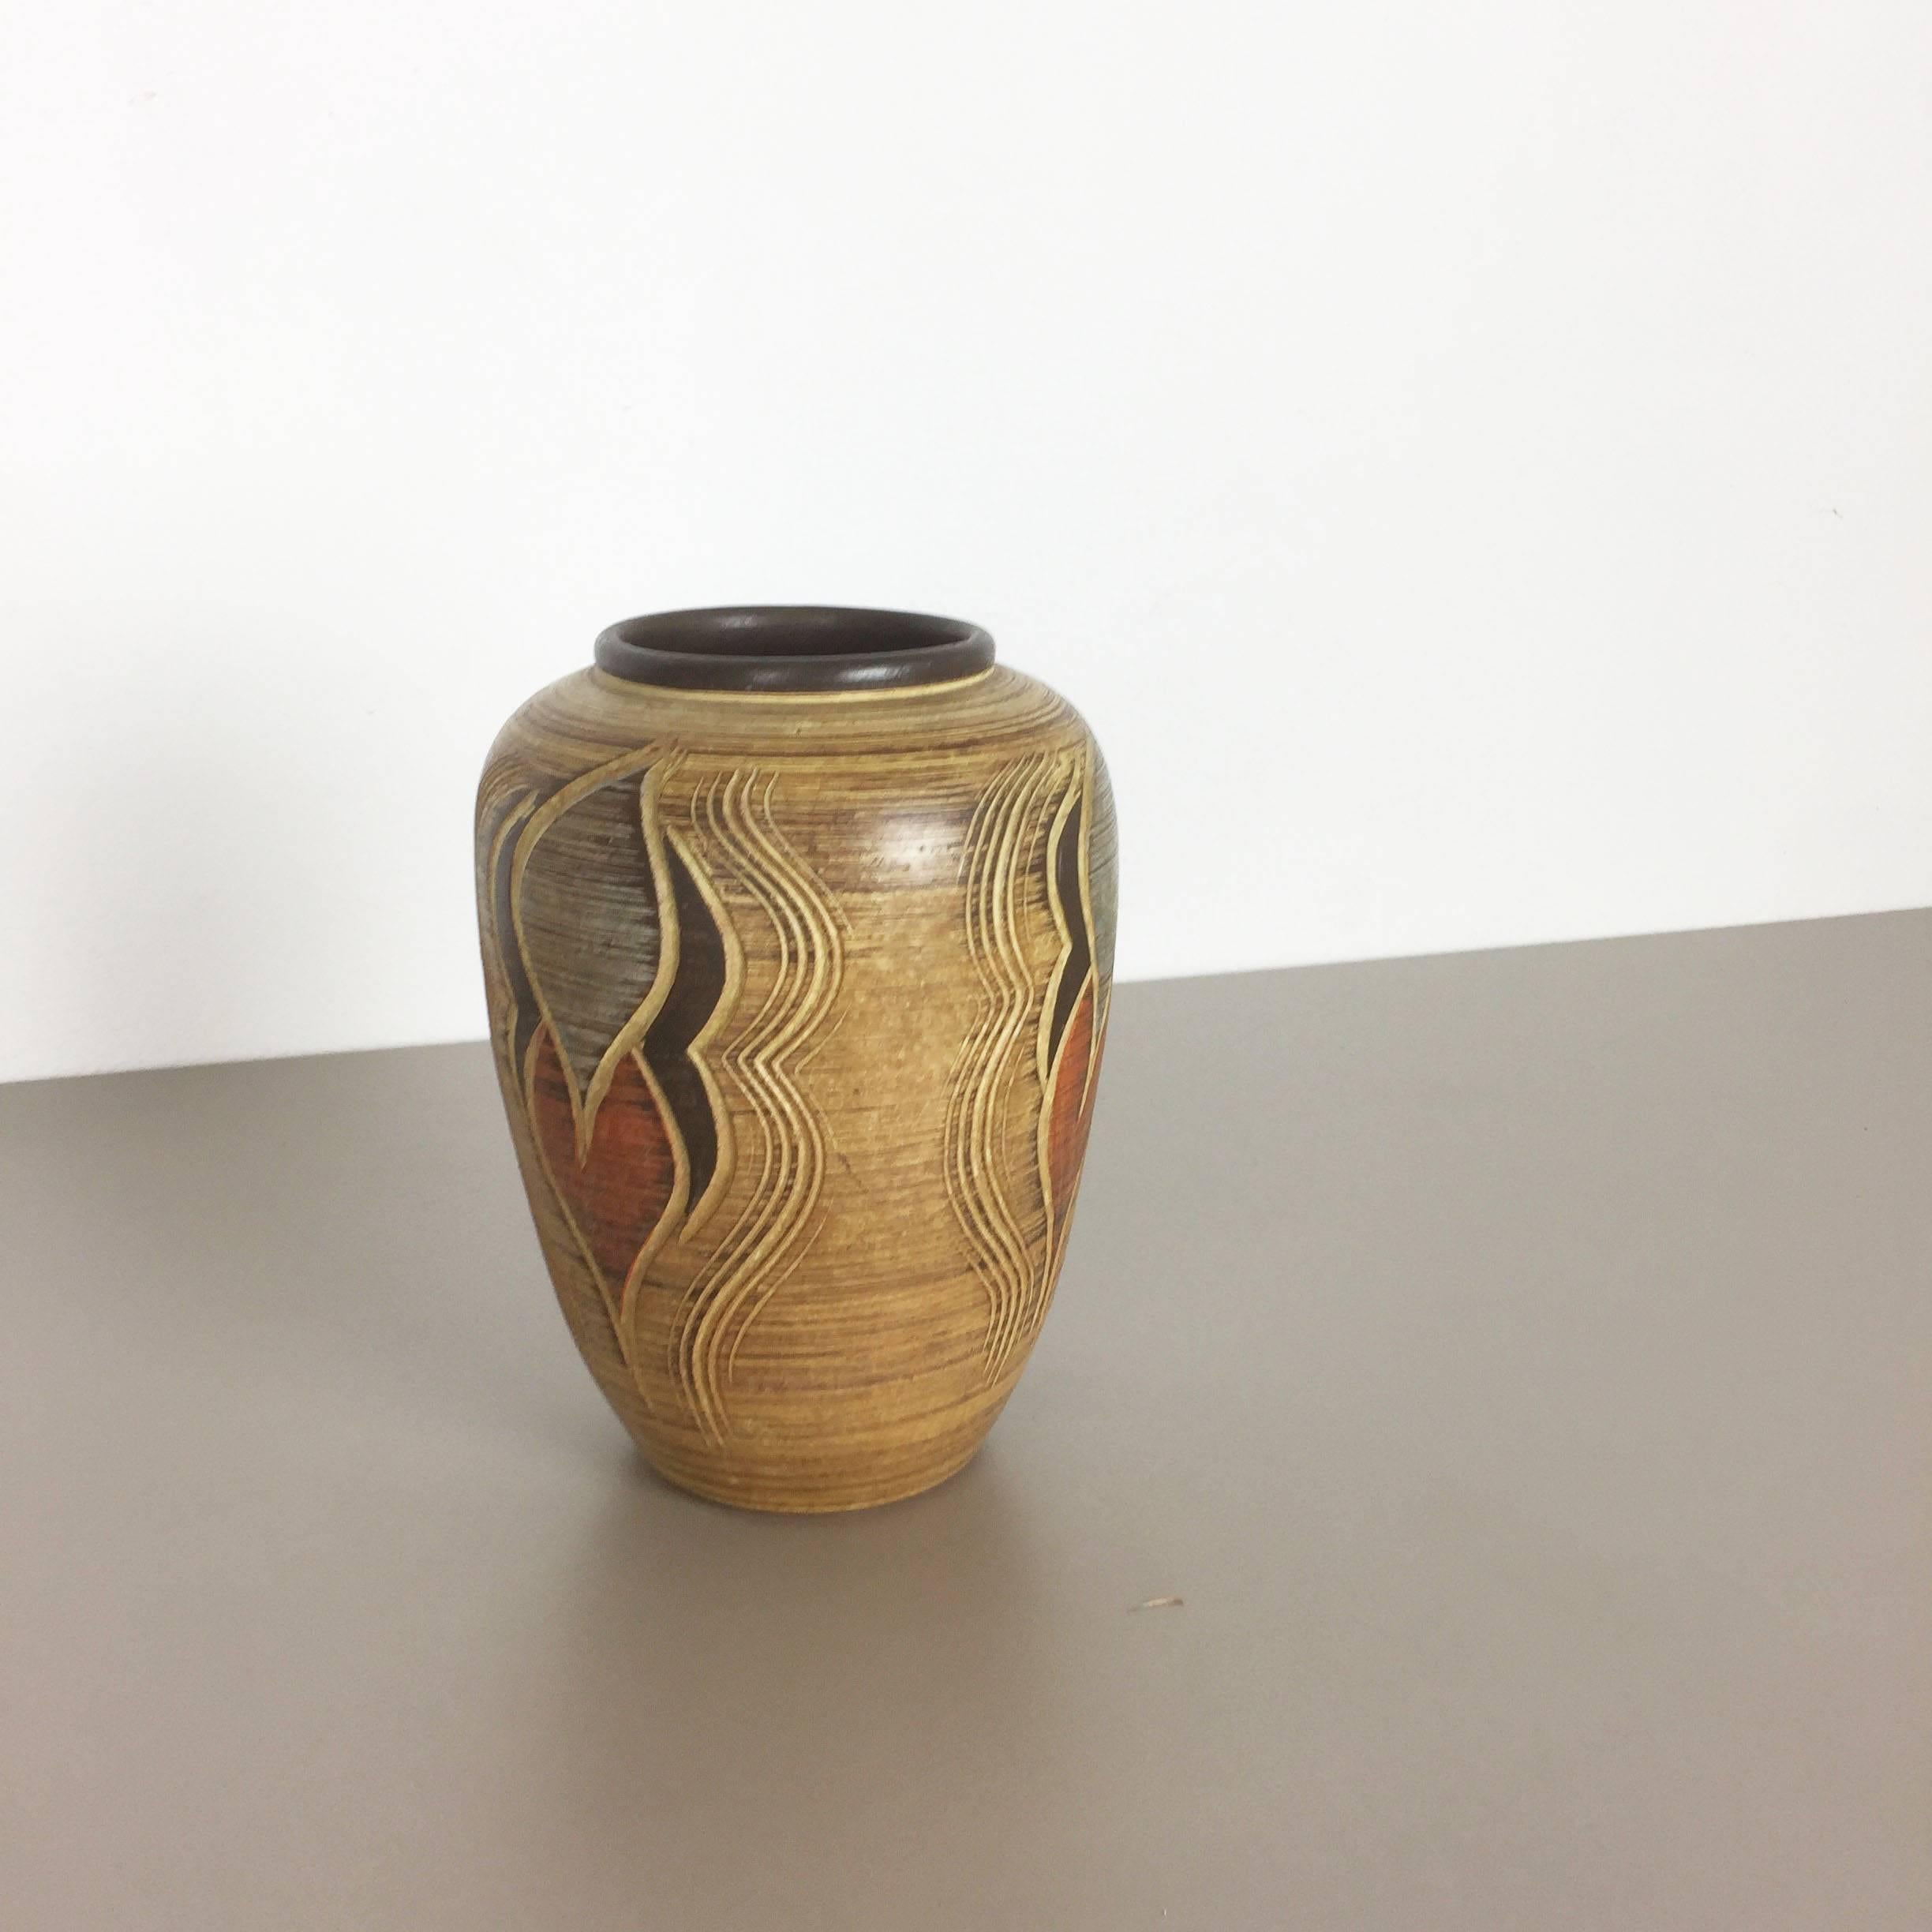 Article:

Pottery ceramic vase


Producer:

Sawa Ceramic, Germany


Design:

Franz Schwaderlapp



Decade:

1960s



Original vintage 1960s pottery ceramic vase in Germany. High quality german production with a nice abstract